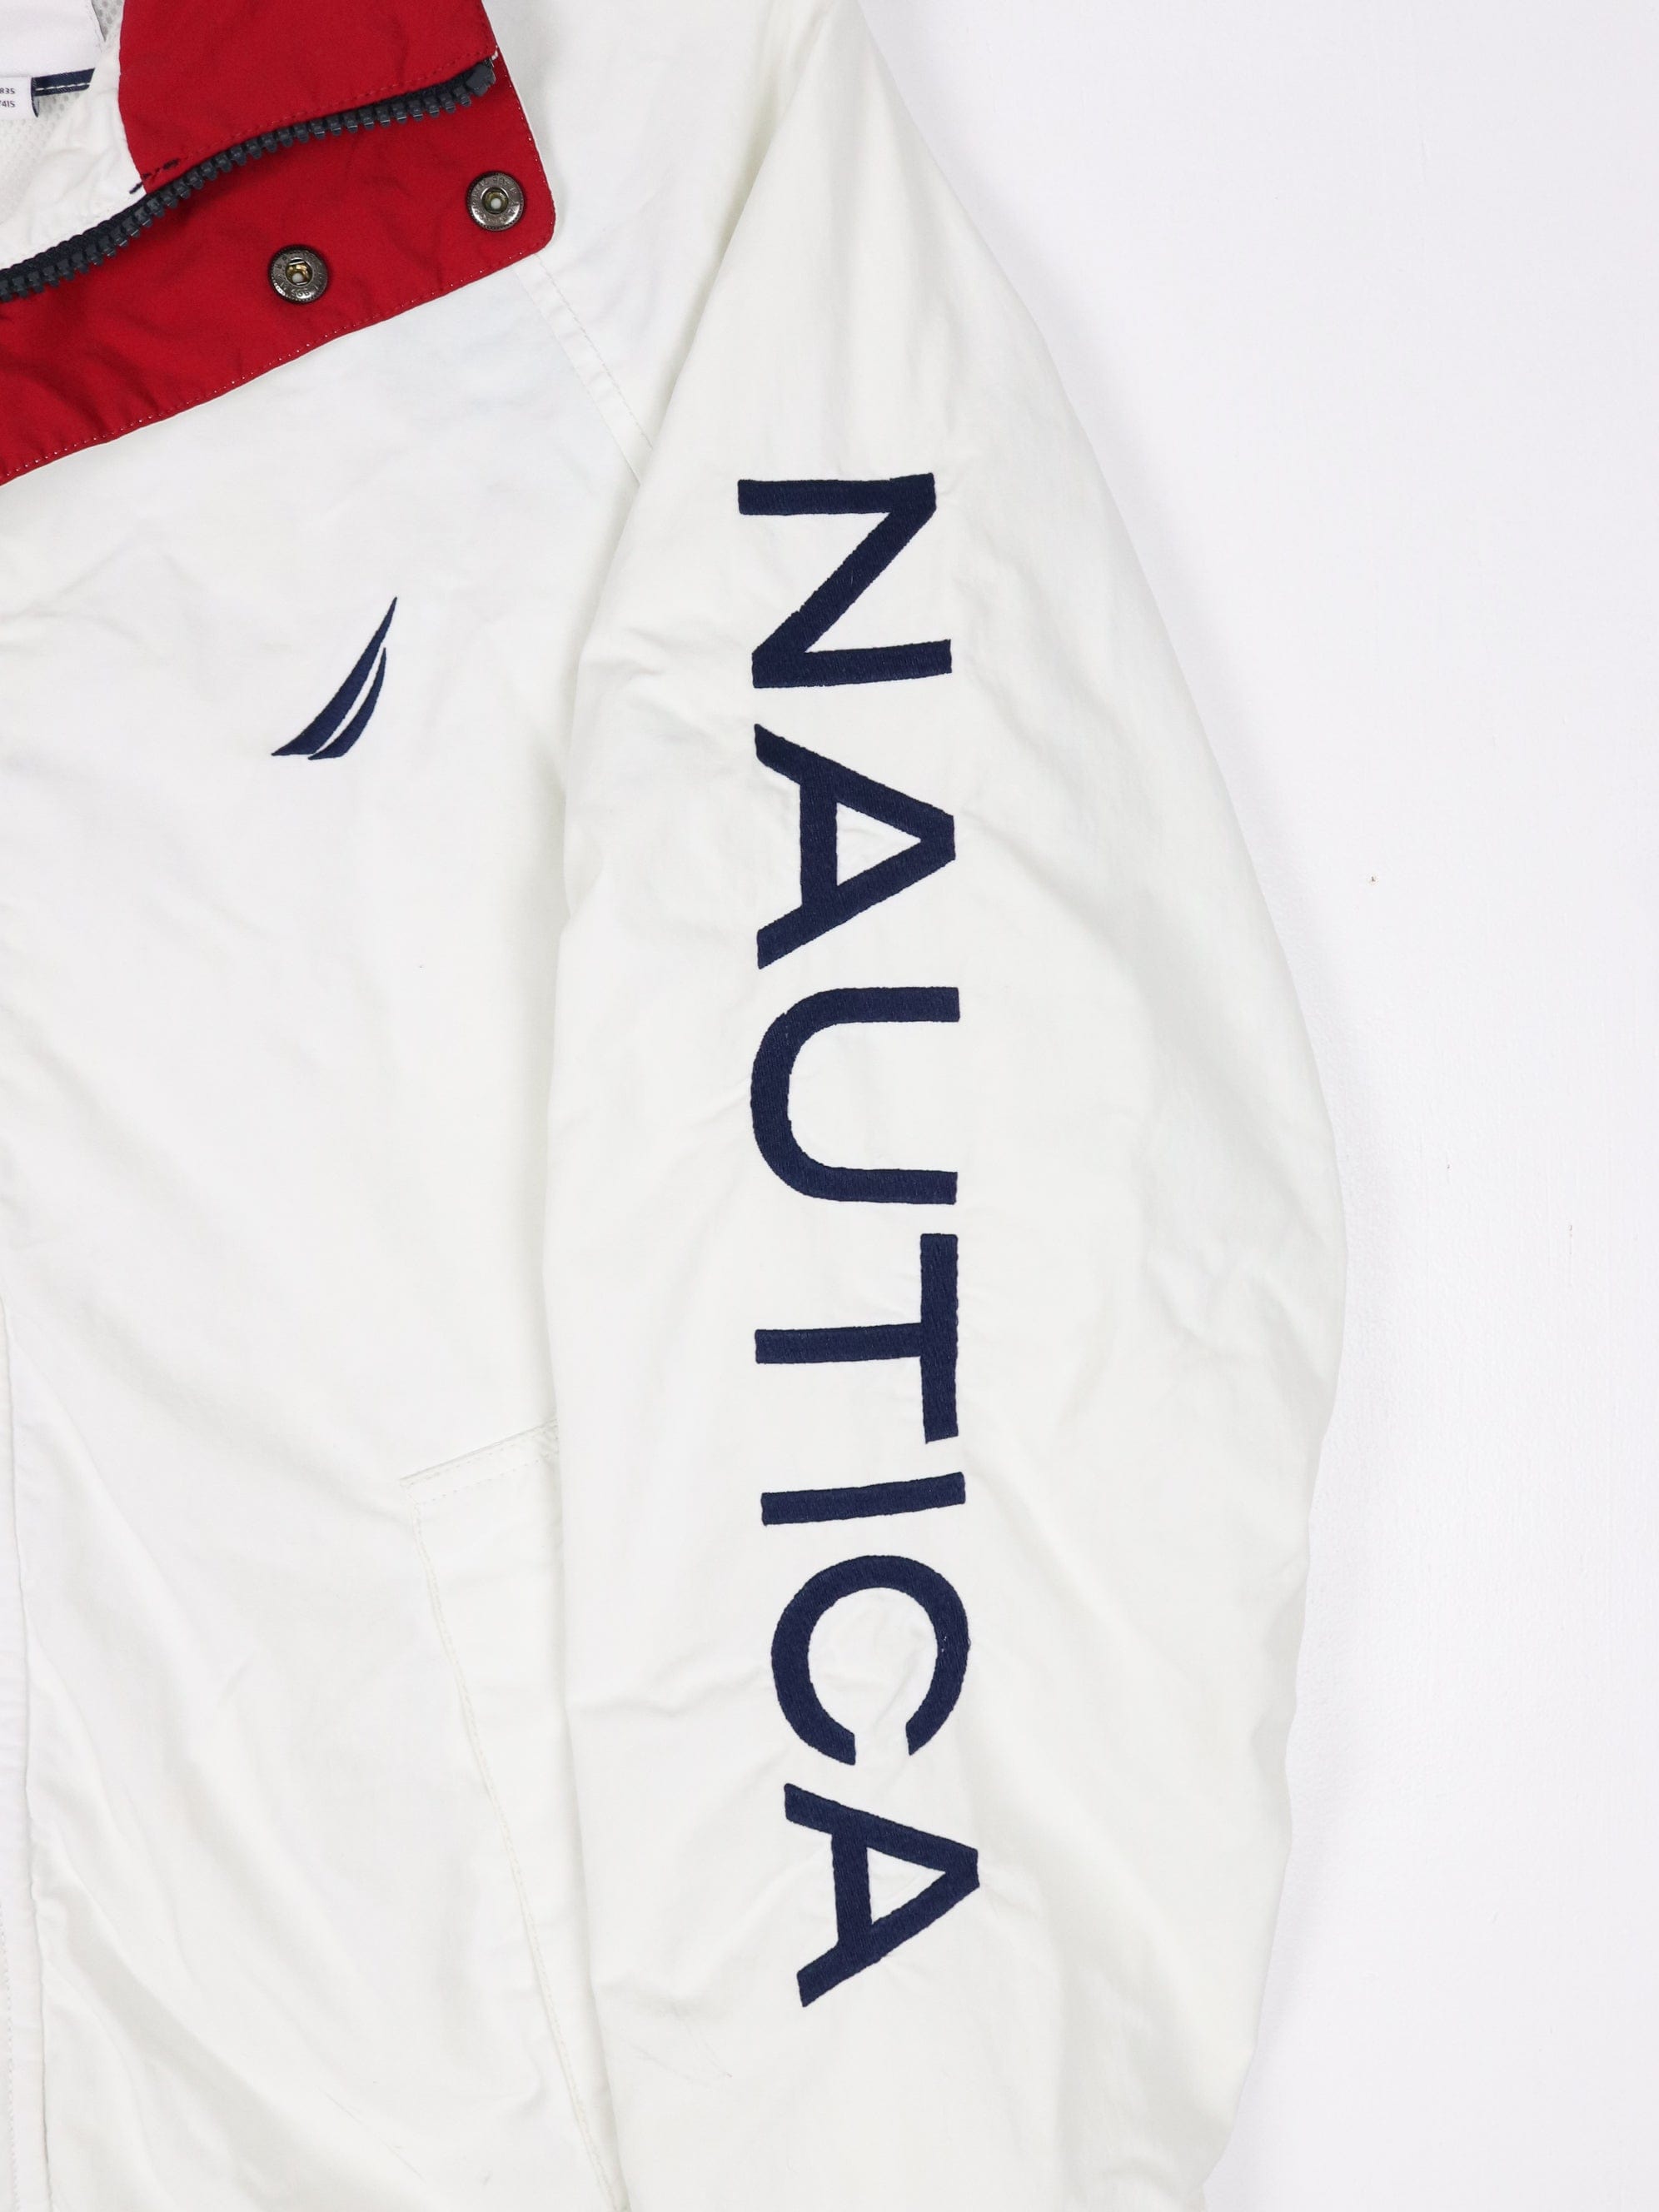 Nautica Jacket Mens XS White Sailing Windbreaker Outdoors Spell Out –  Proper Vintage